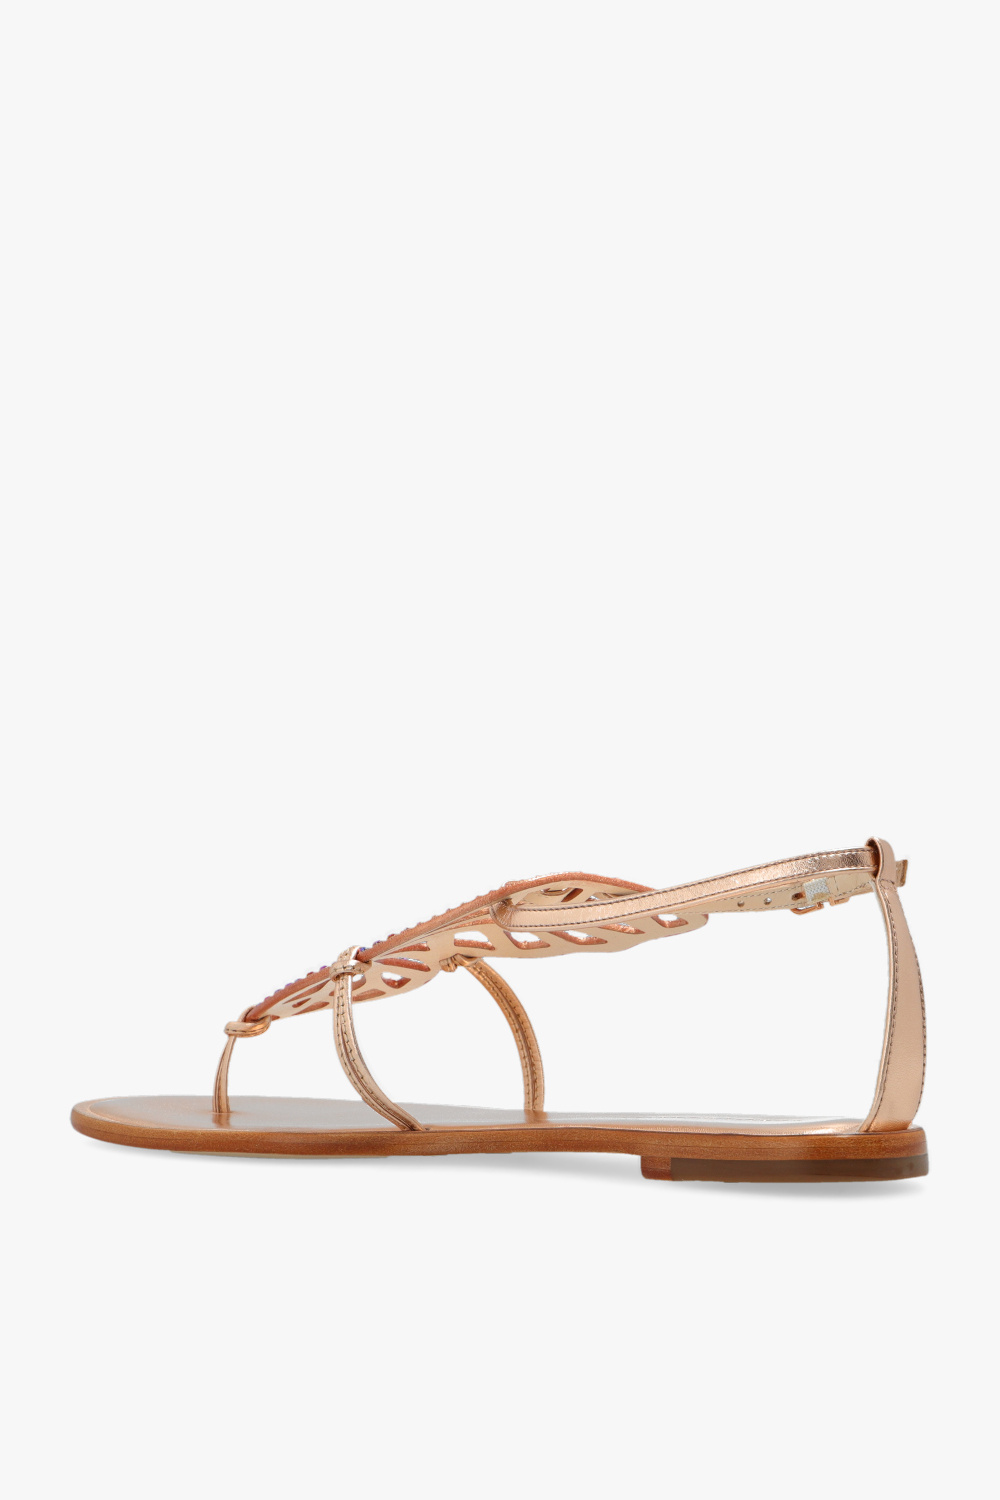 Sophia Webster ‘Butterfly’ heeled curry sandals